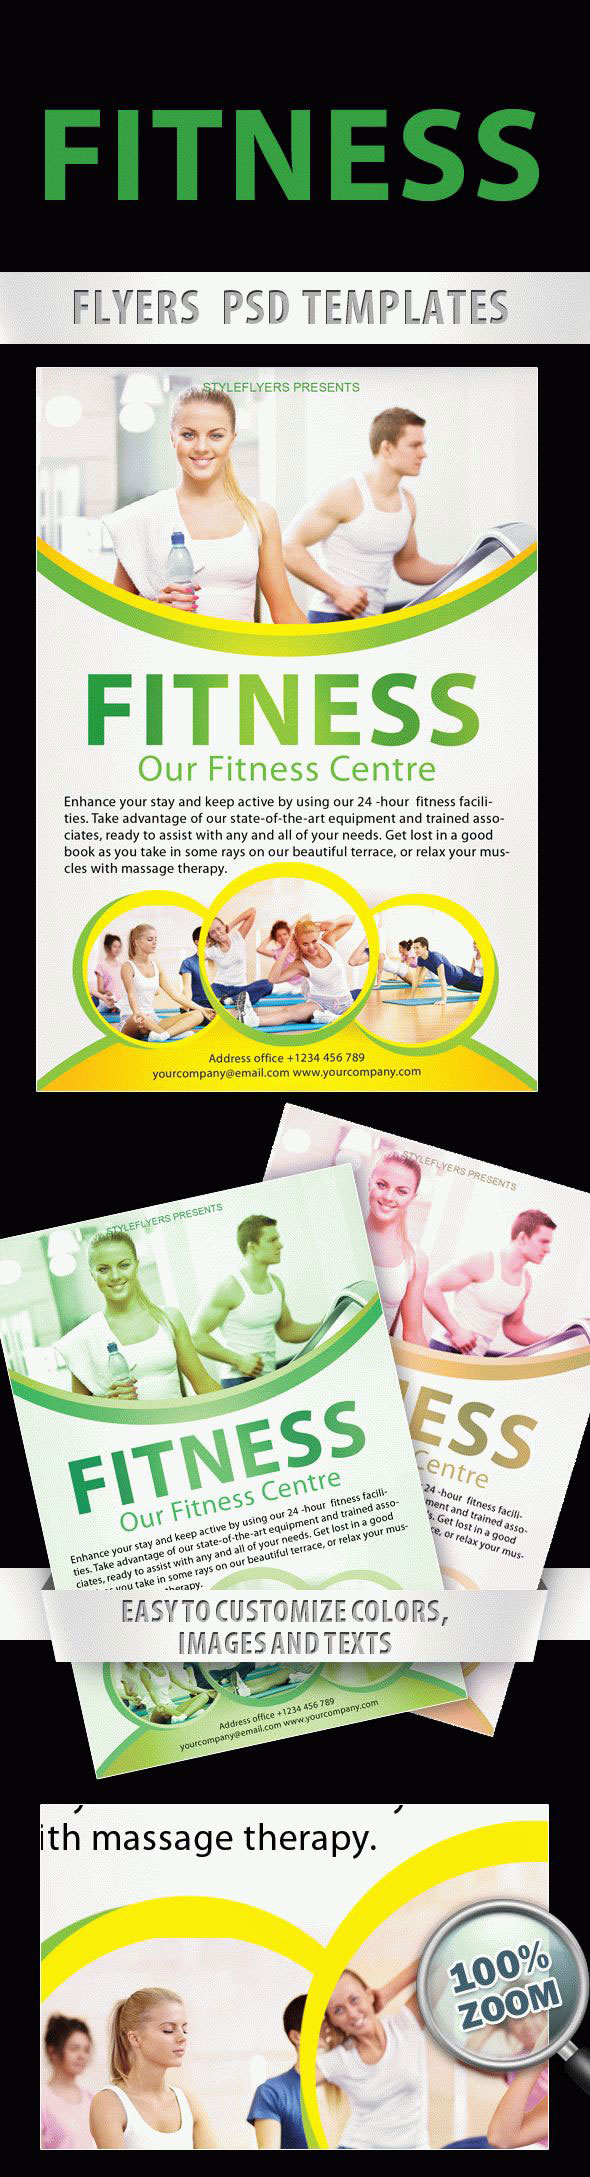 Be Active and Fit Keep Active and Fit : Keep active and fit: PSD